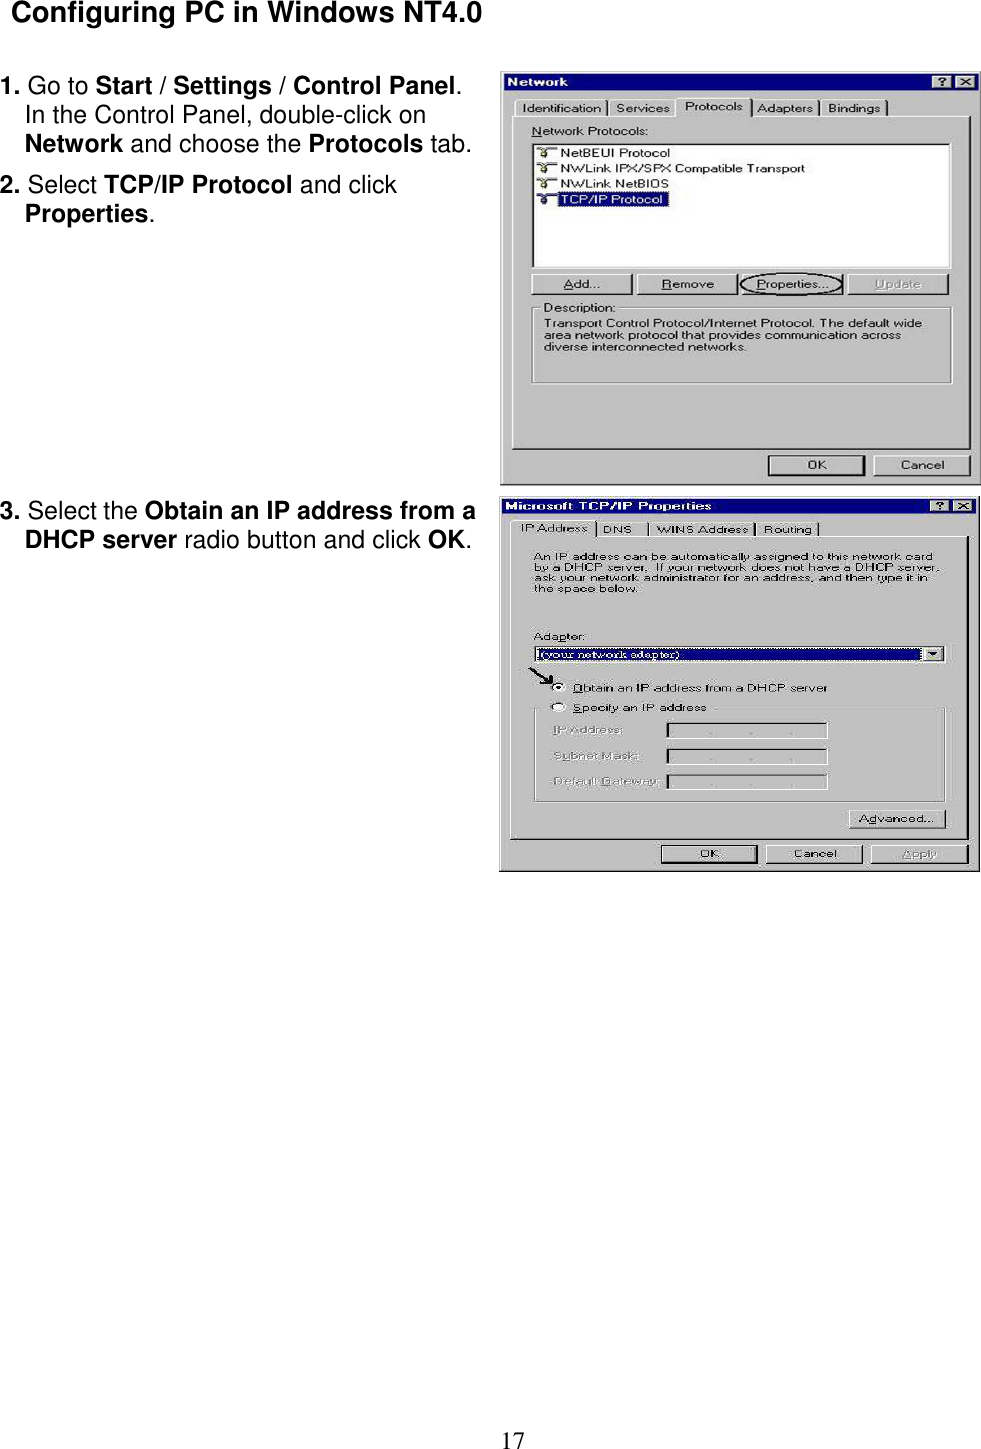 17  Configuring PC in Windows NT4.0                1. Go to Start / Settings / Control Panel. In the Control Panel, double-click on Network and choose the Protocols tab. 2. Select TCP/IP Protocol and click Properties.   3. Select the Obtain an IP address from a DHCP server radio button and click OK.  